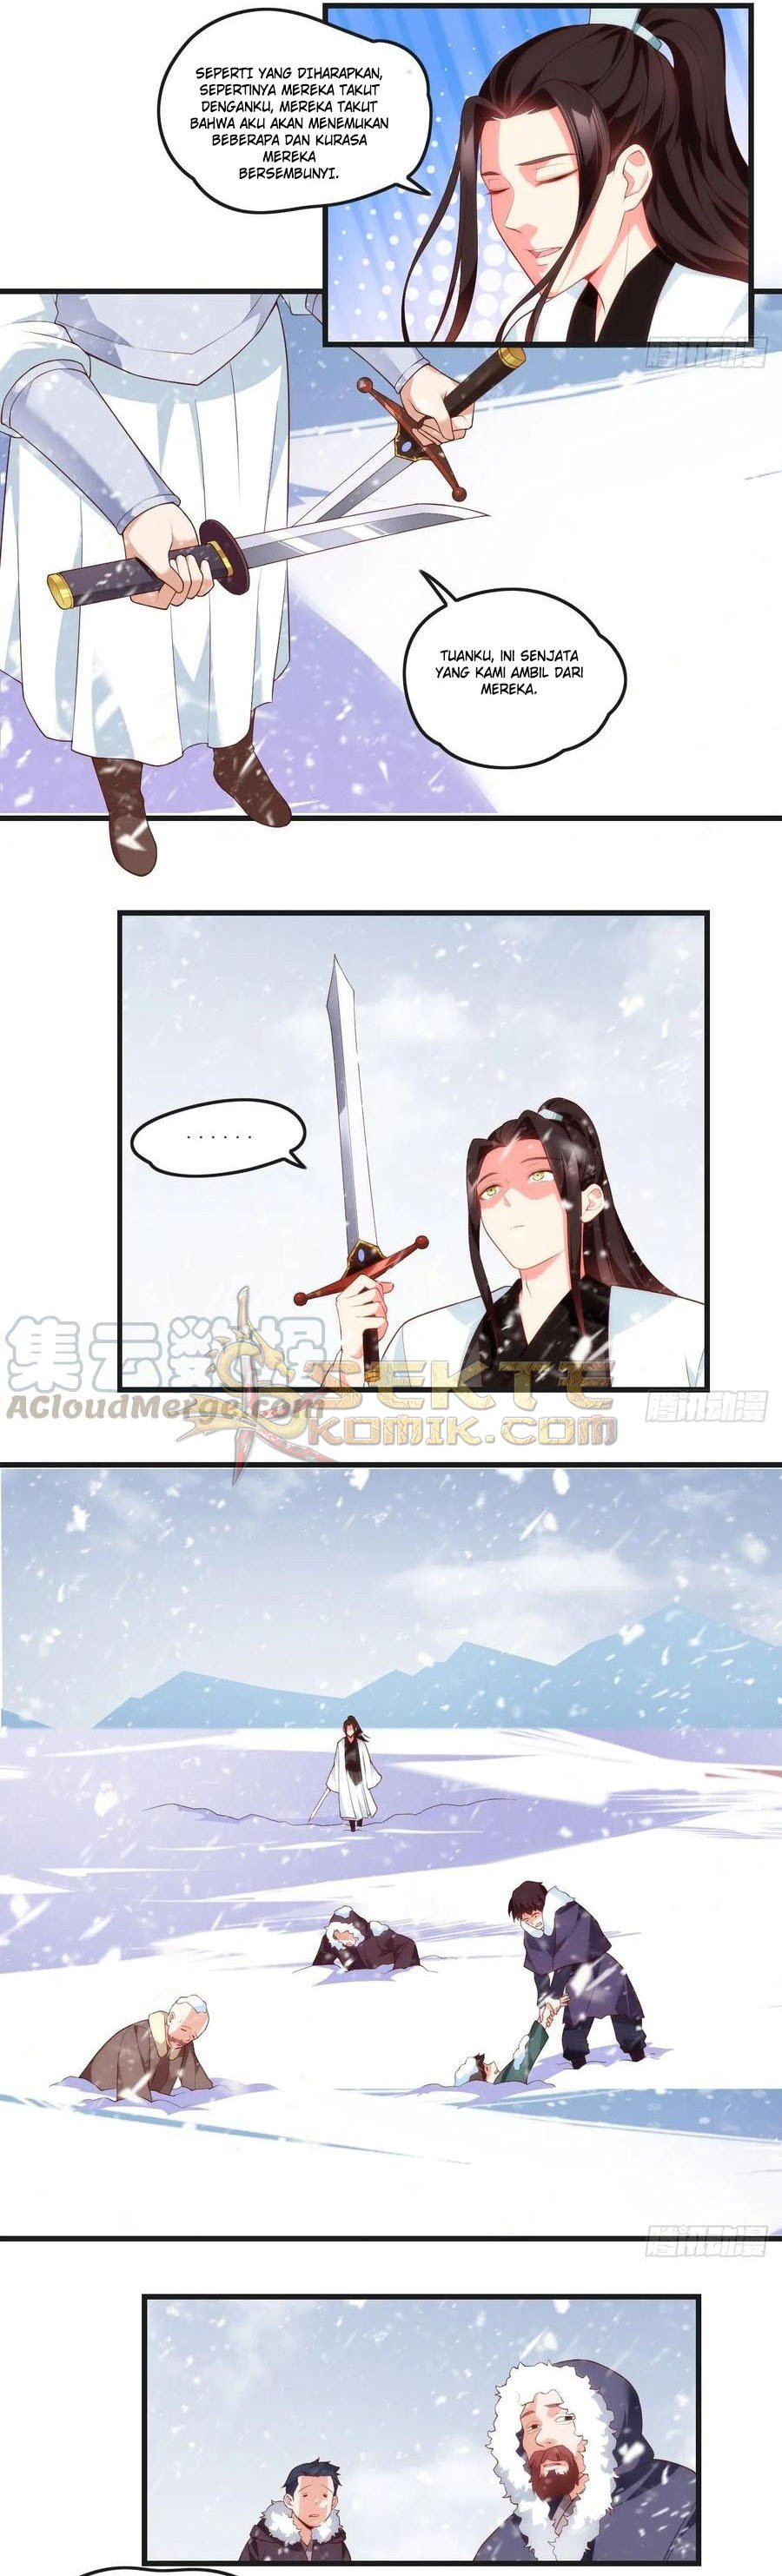 Useless Young Master Chapter 50